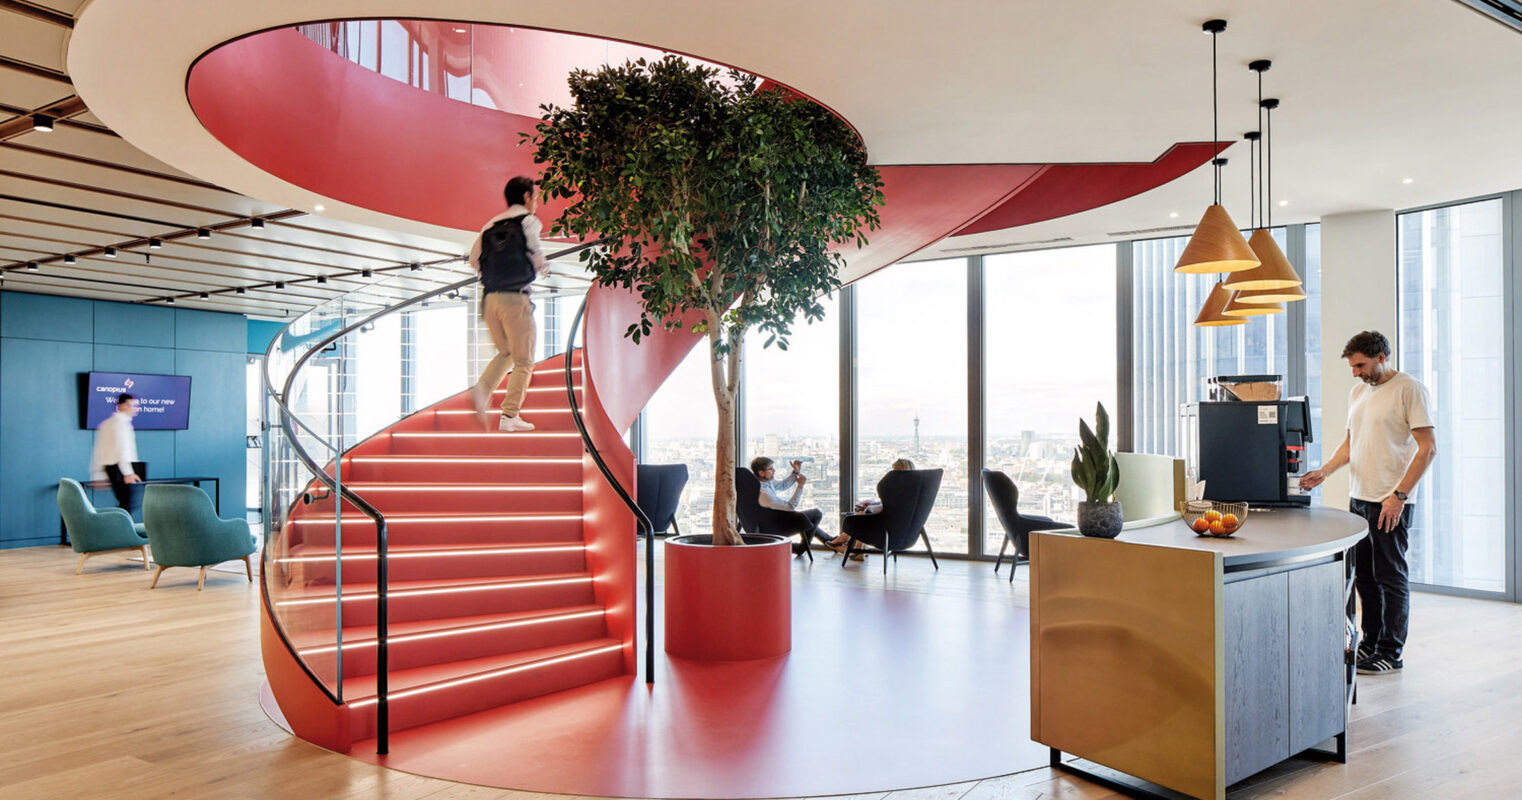 Modern office space with an open-plan layout featuring bold red spiral staircase, central green tree, vibrant blue wall panels, and eclectic furniture that encourages interaction and collaboration. Natural light floods the area, creating a dynamic, energizing workplace.